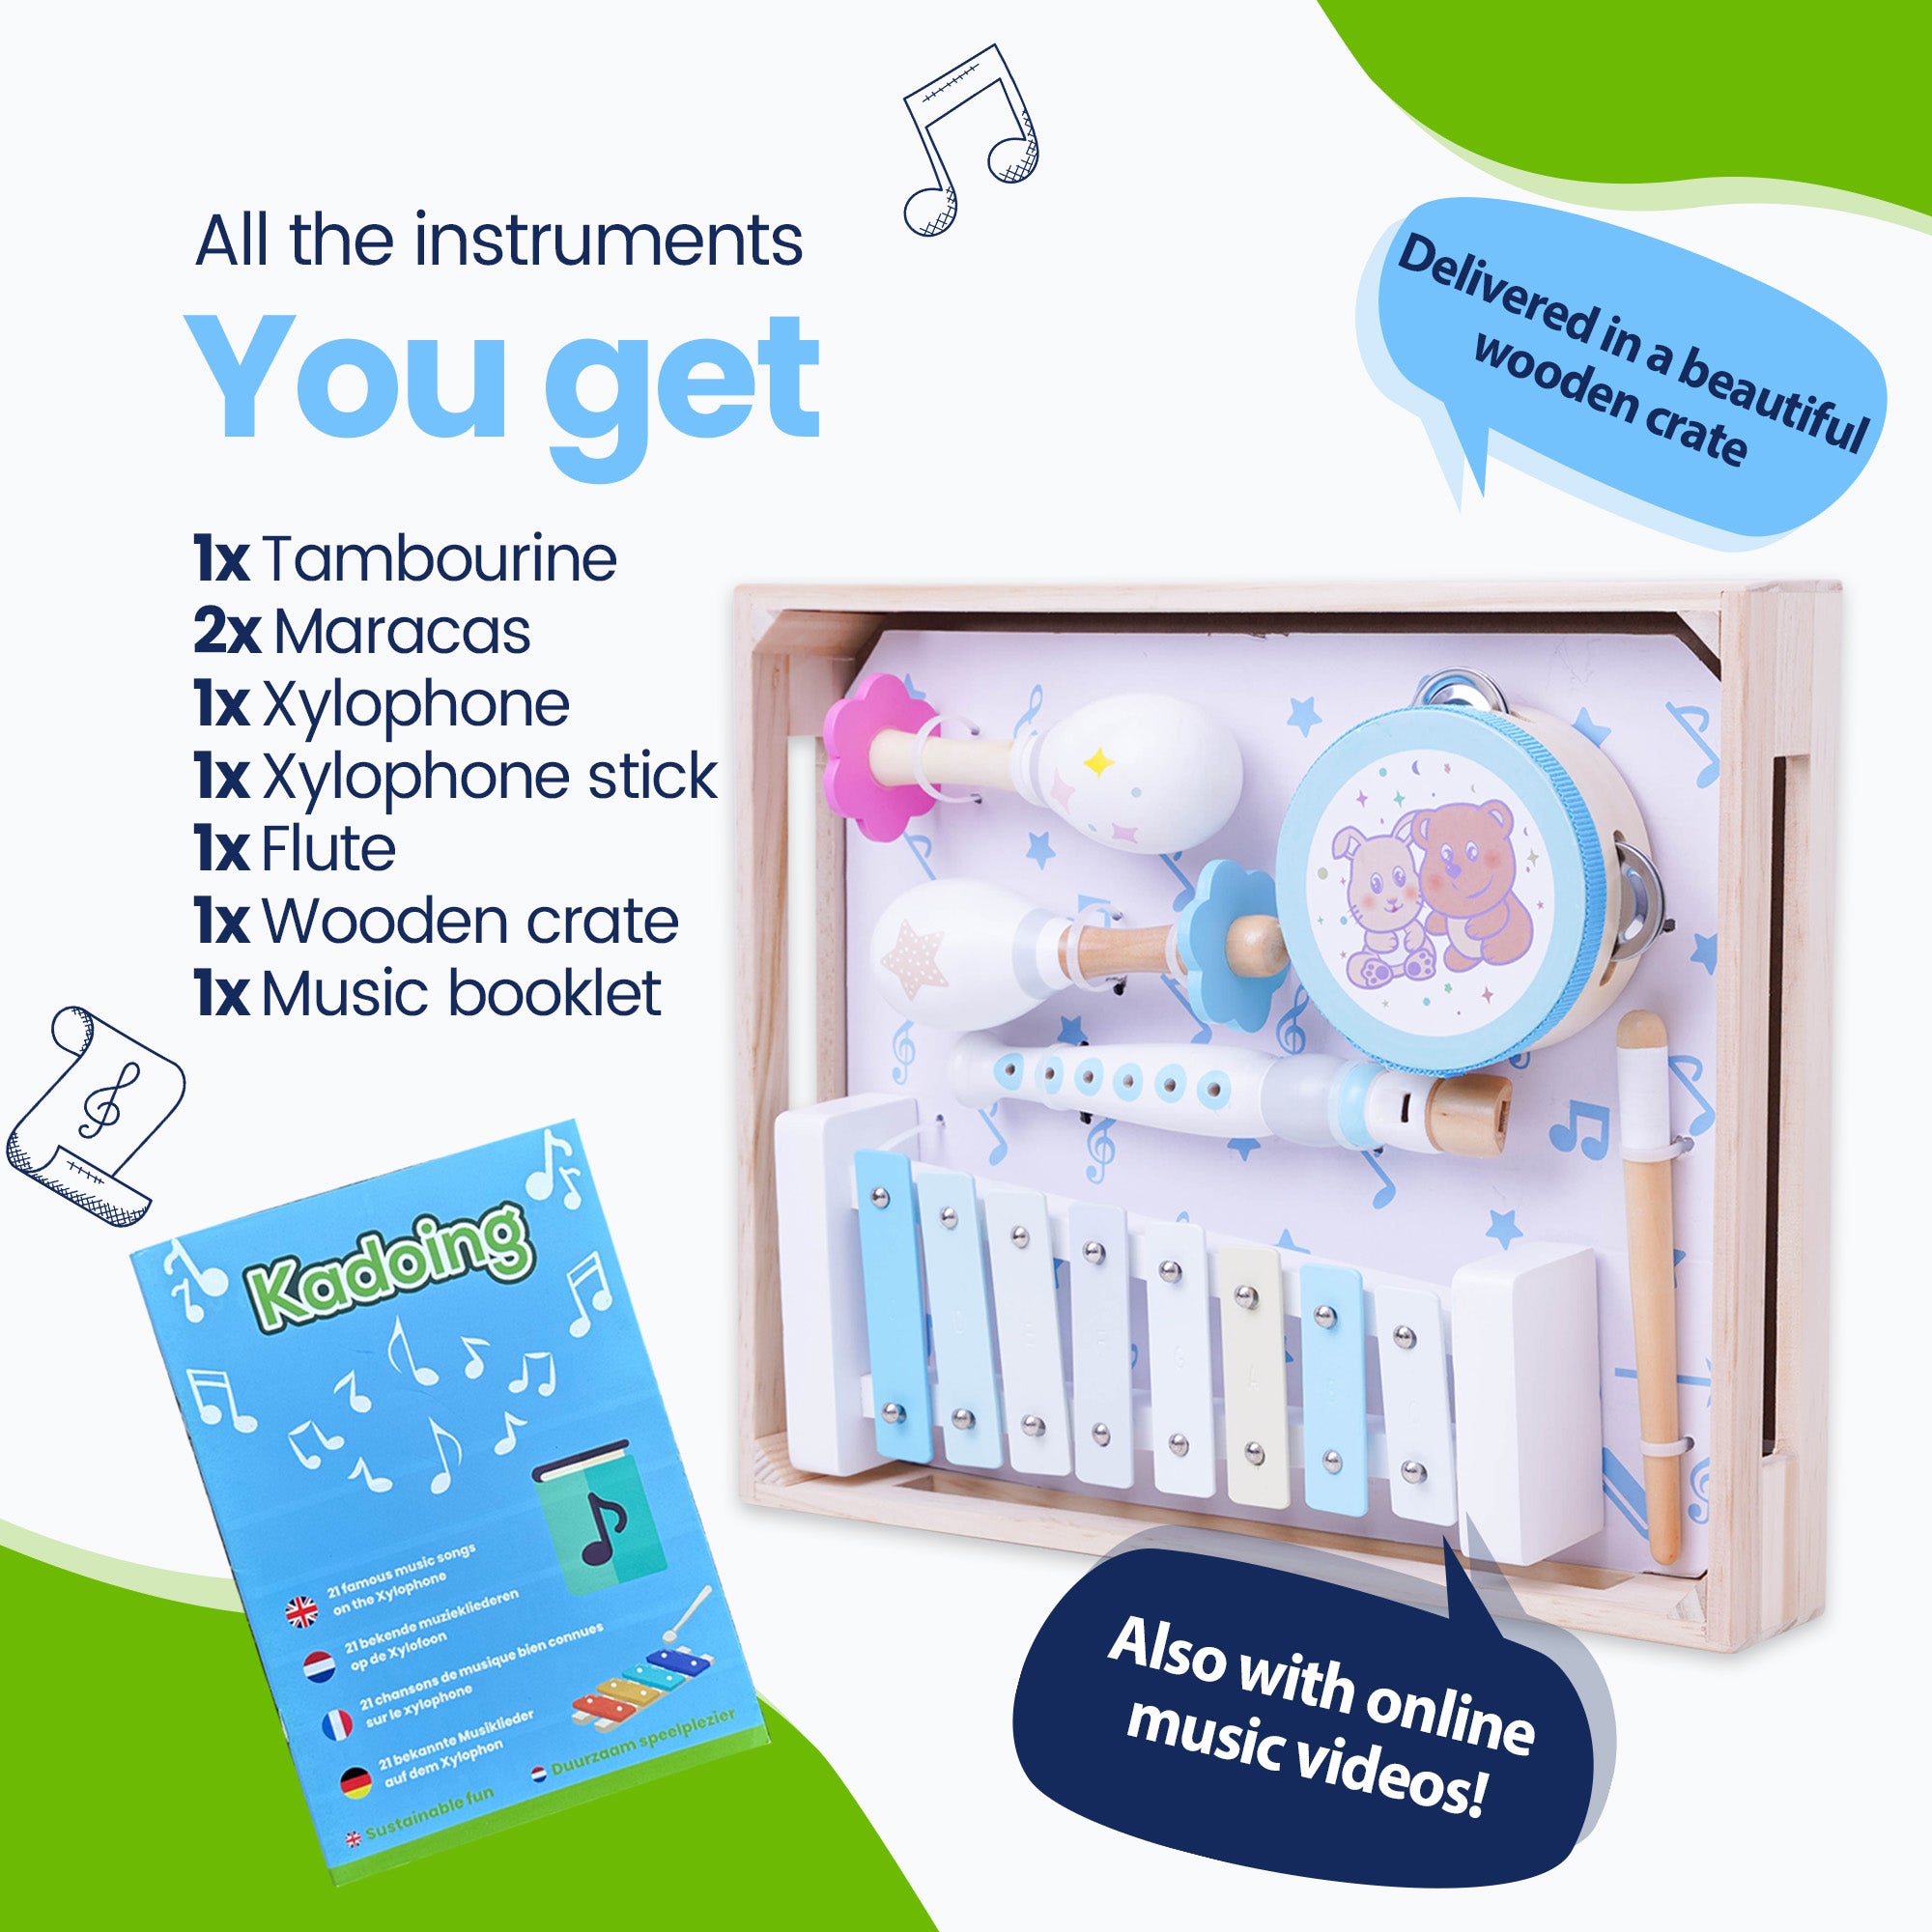 All instruments you receive - in a beautiful wooden crate of solid-rubber quality - Tambourine - Rattle - Xylophone - Xylophone stick - flute - Wooden crate - Incl. Xylophone music booklet and online music videos